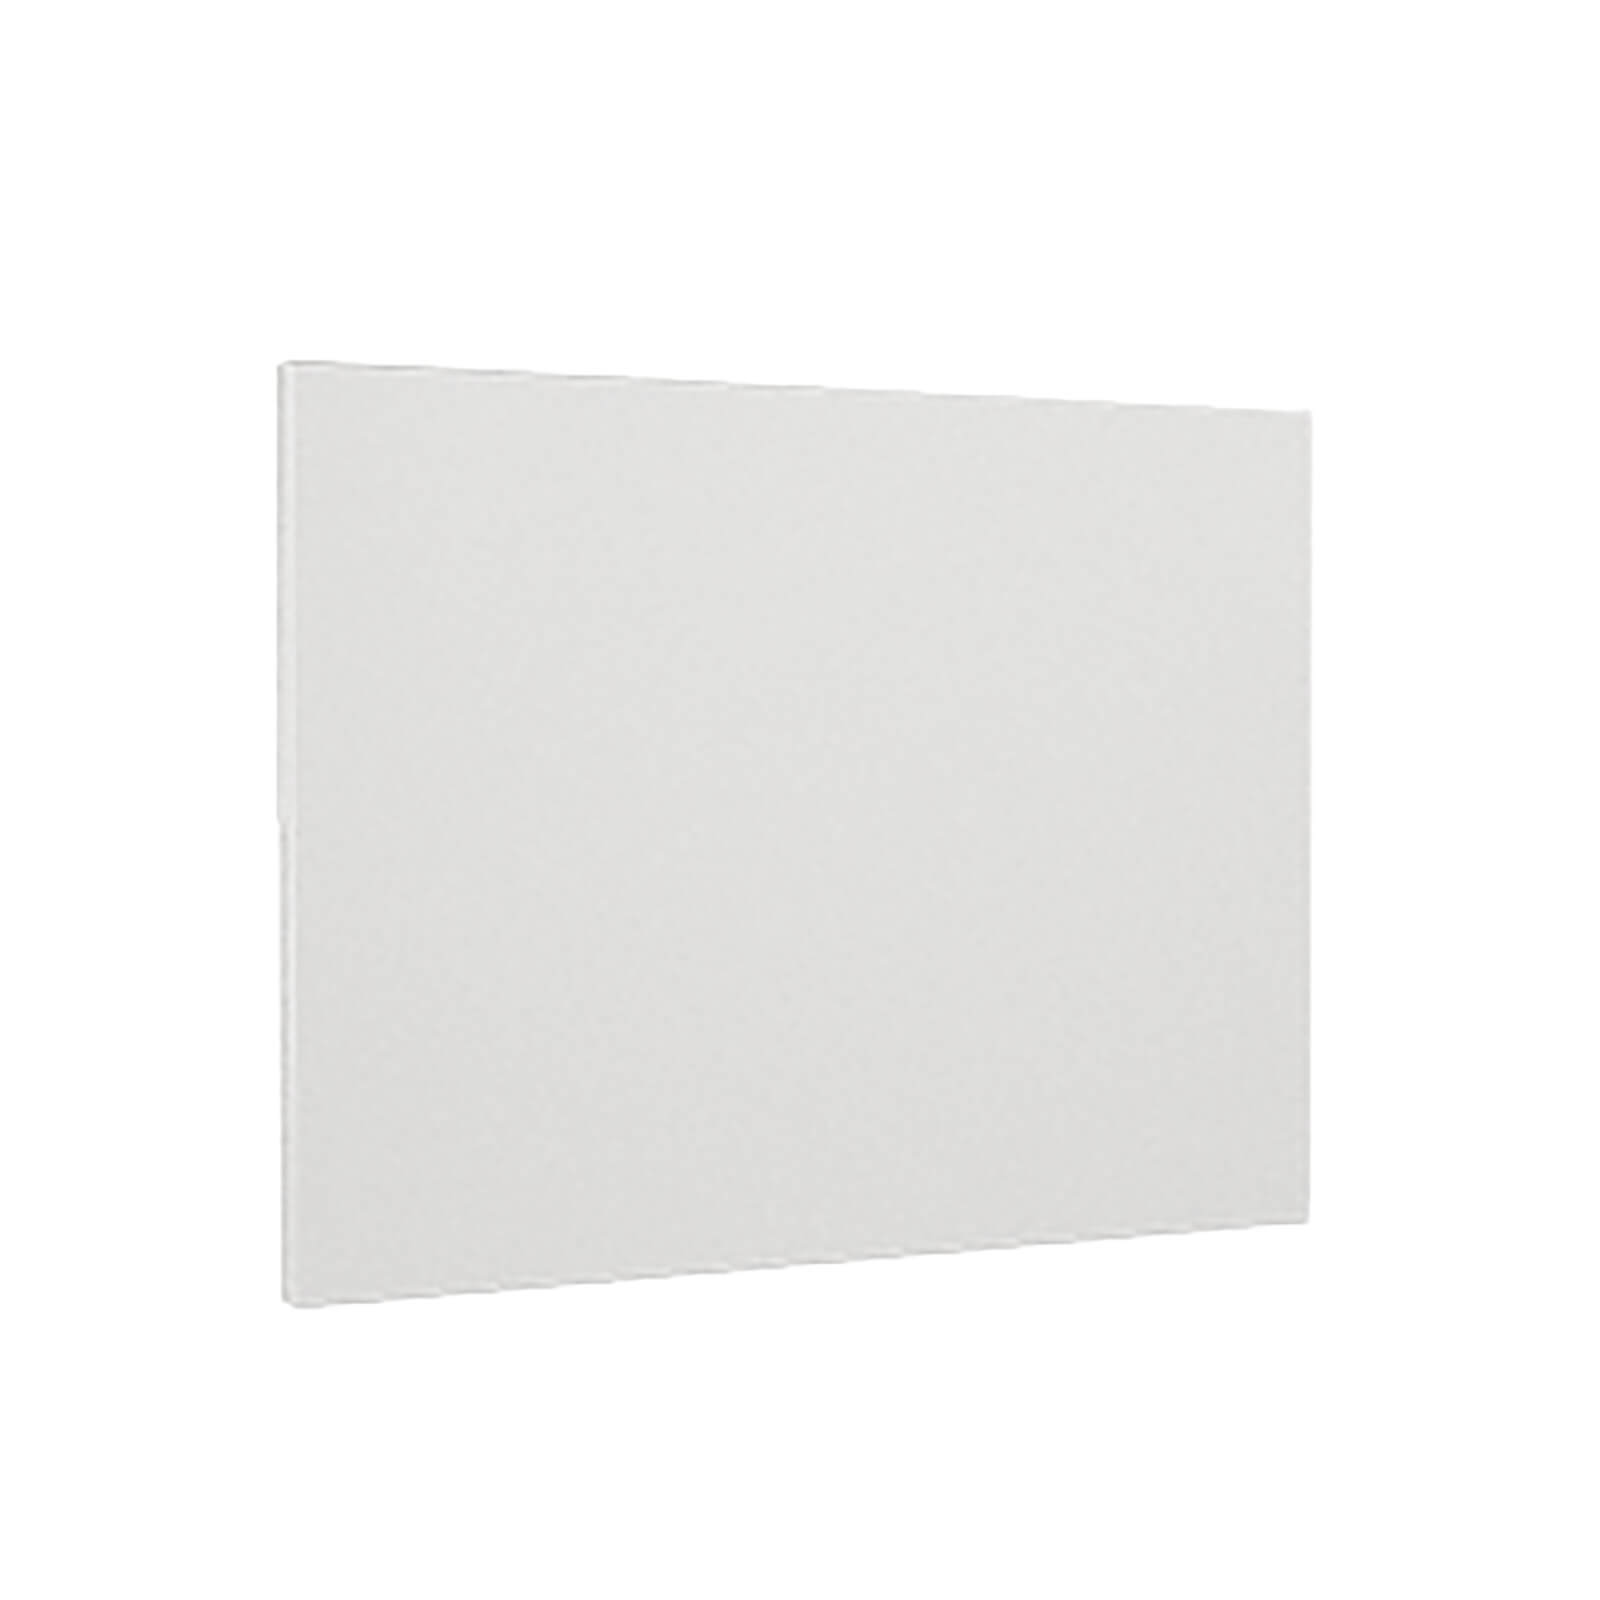 High Gloss Slab White Integrated Extractor Door (597x445)